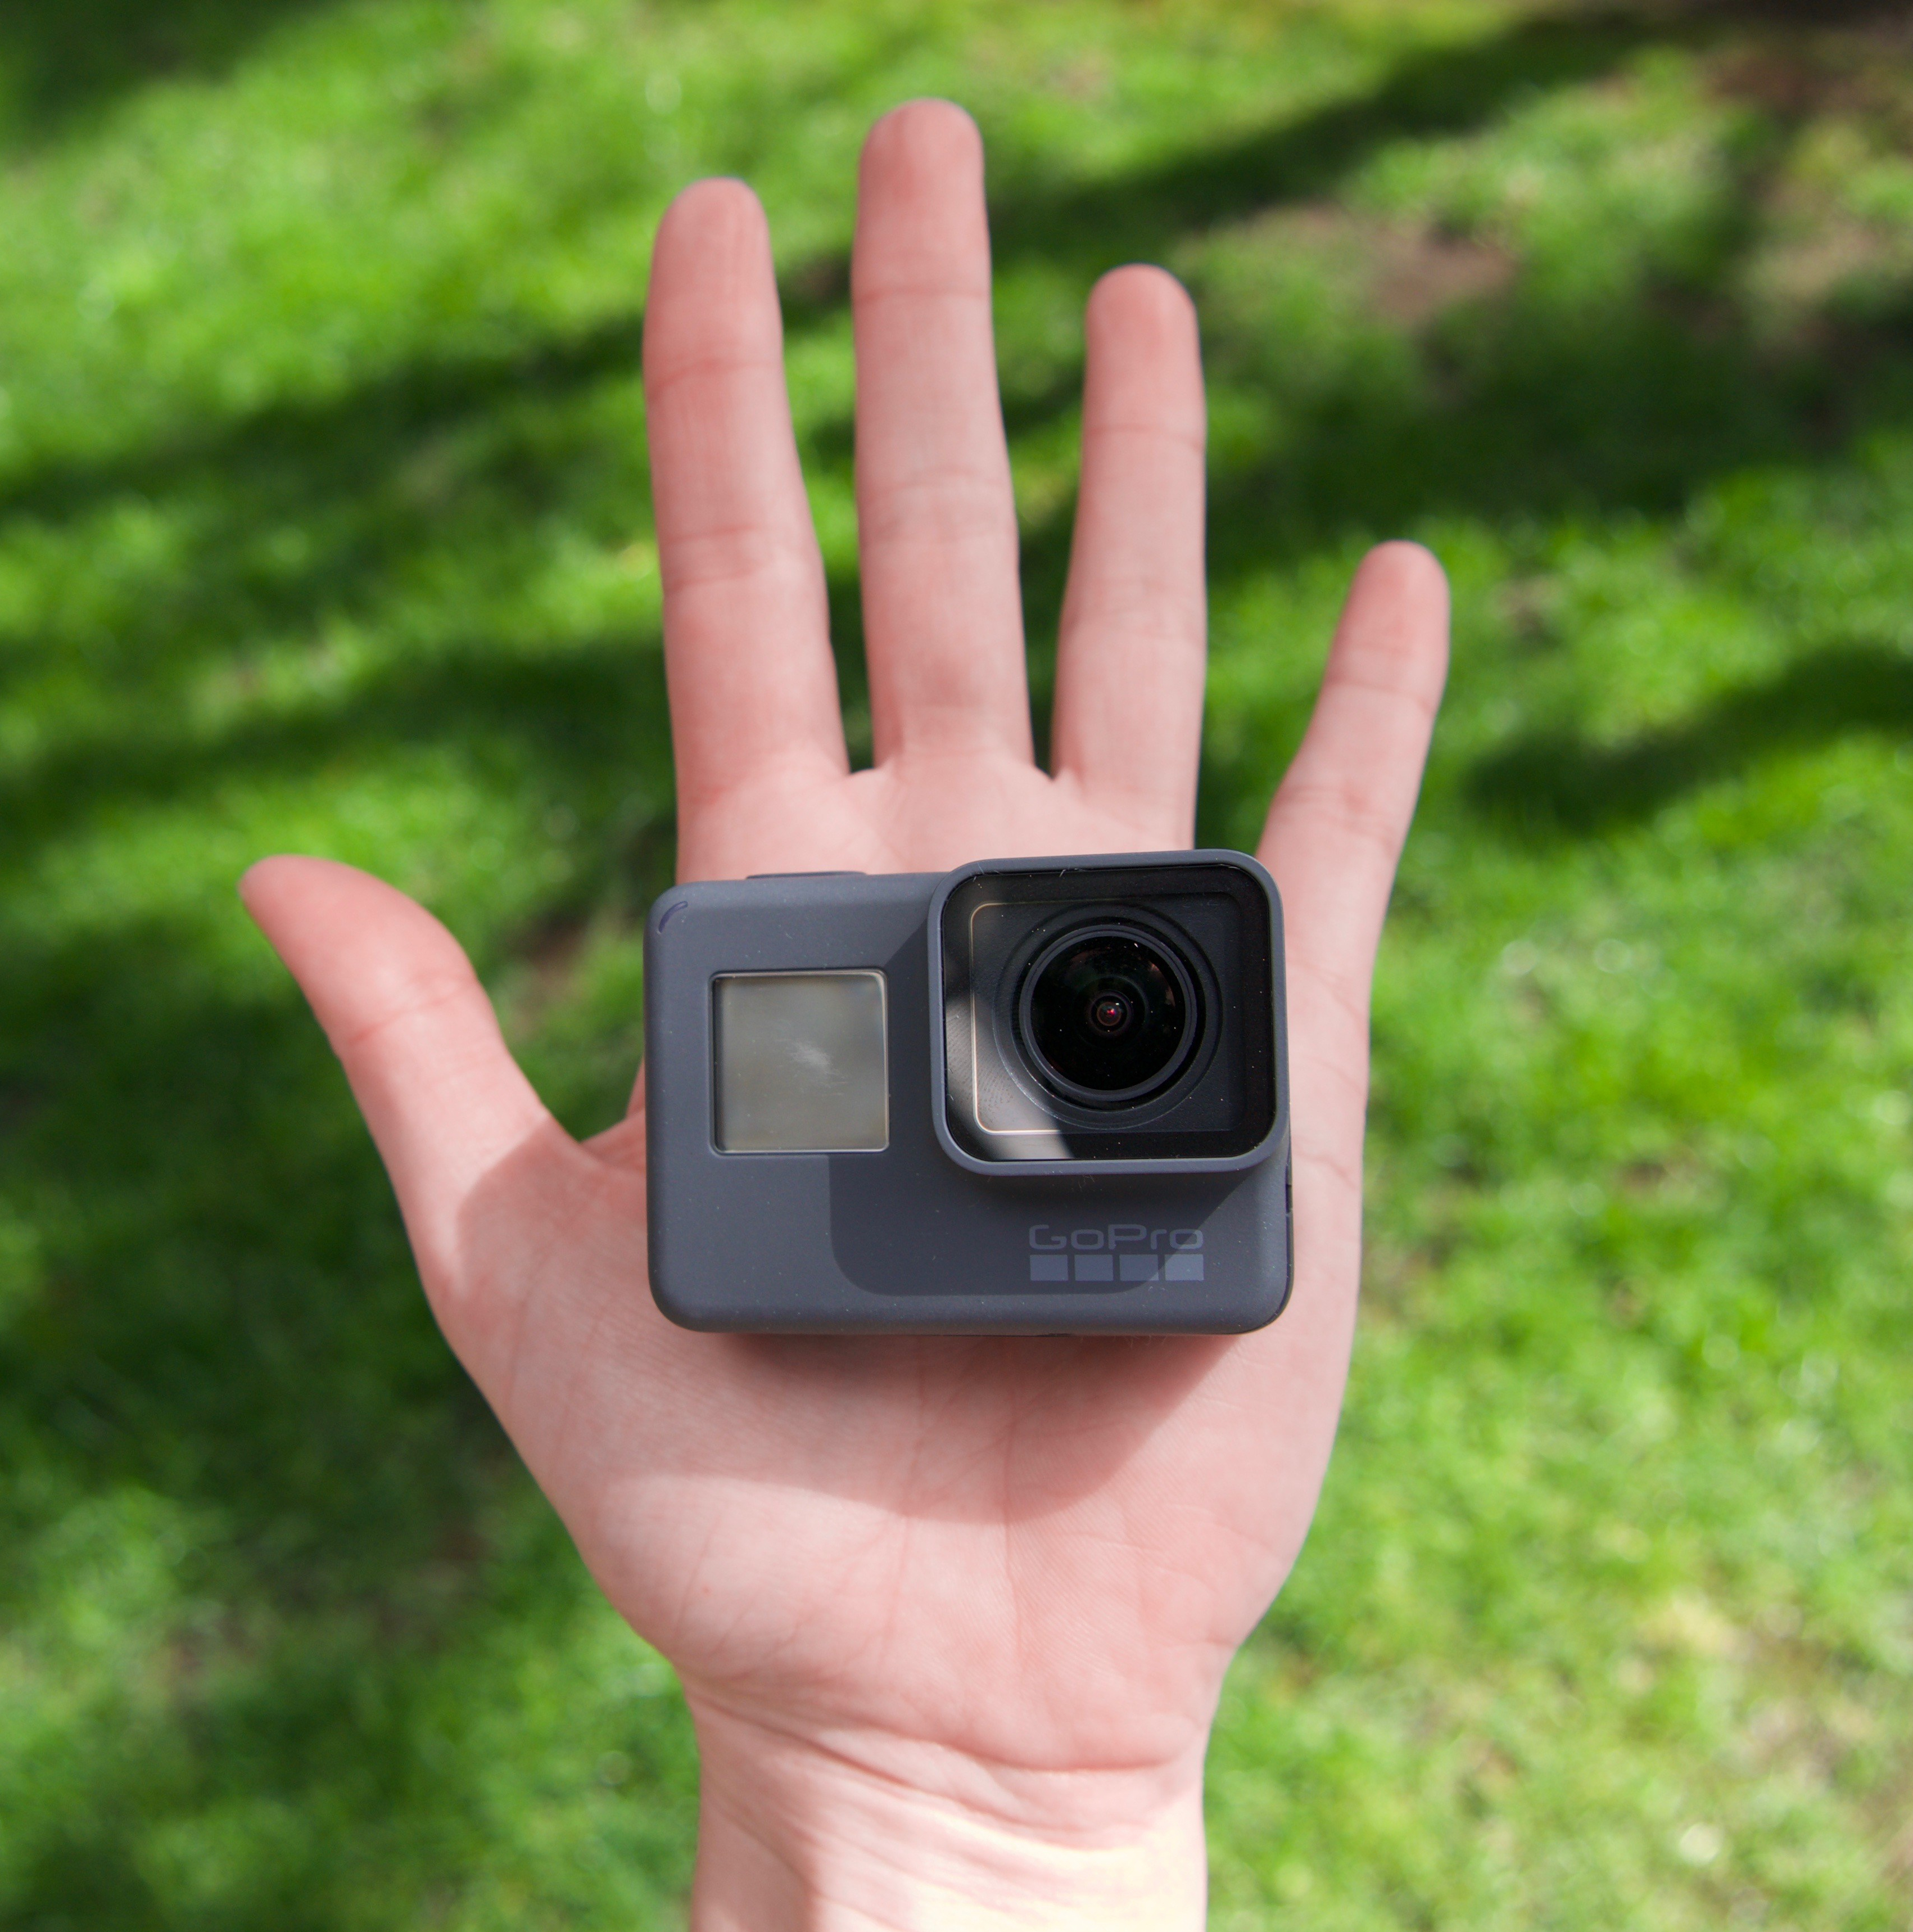 GoPro Hero 6 fits in the palm of your hand